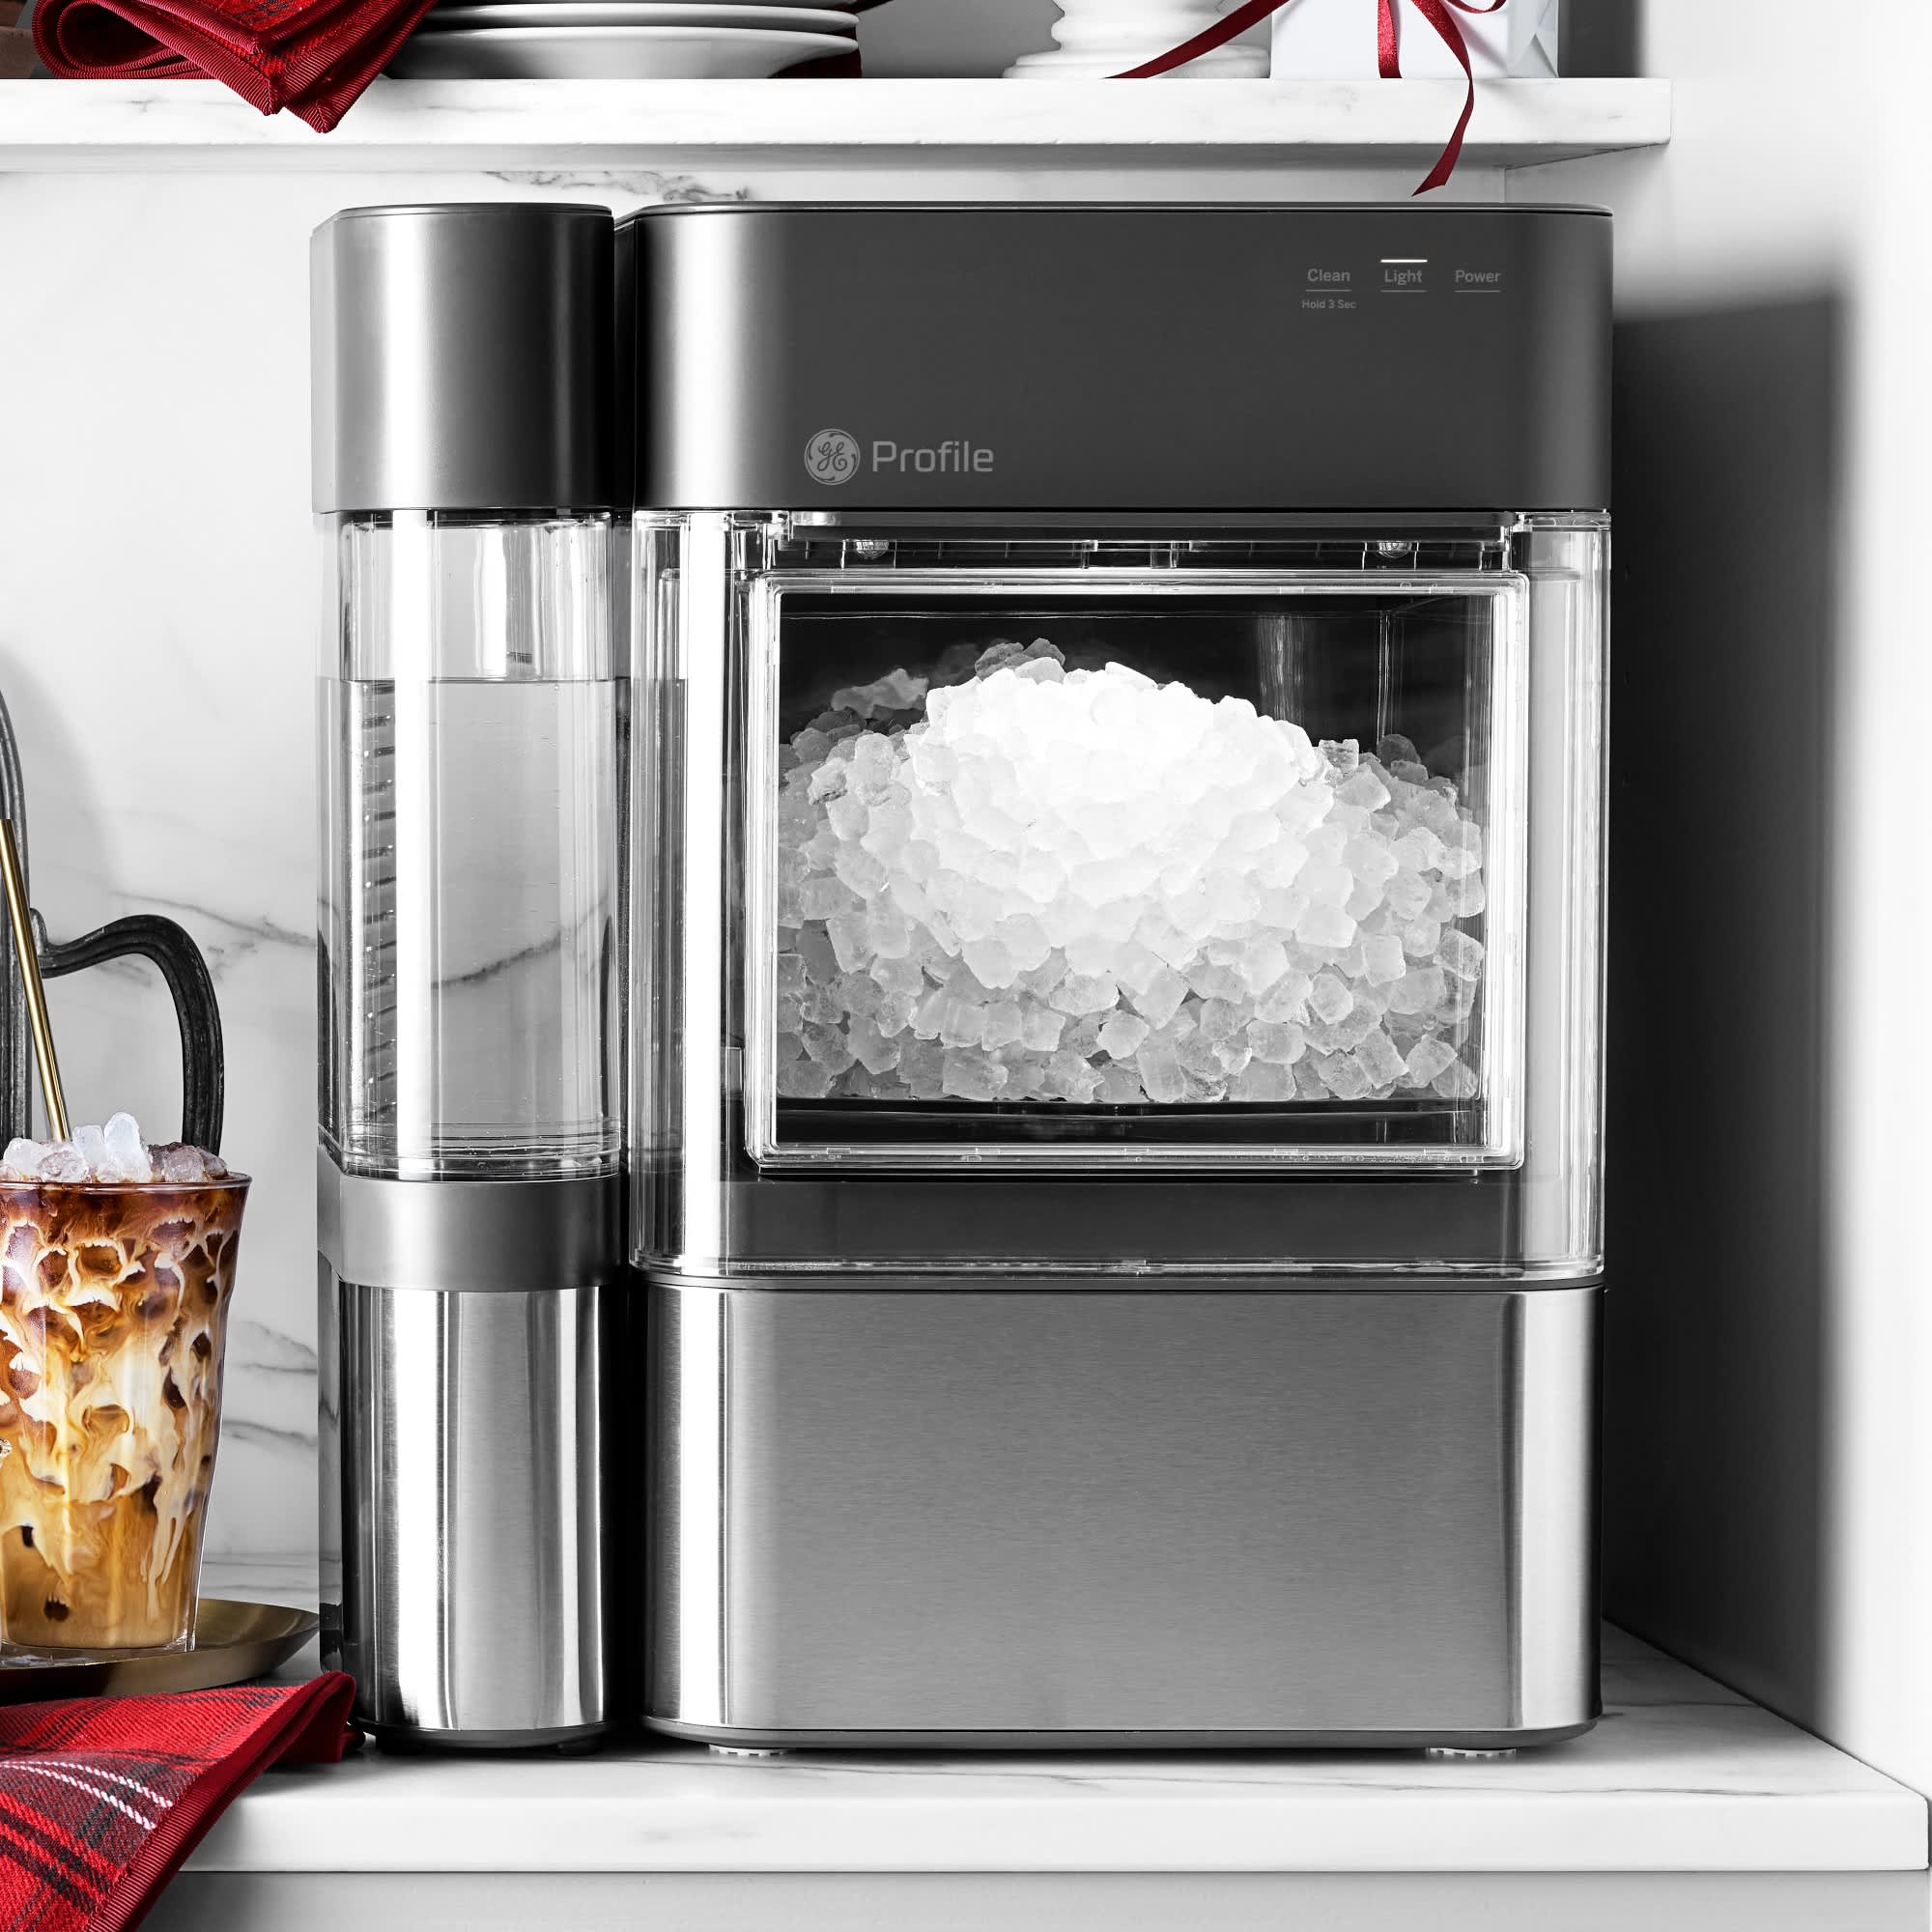 GE Profile Opal 2.0 Nugget Ice Maker Review 2023 - Tested & Reviewed